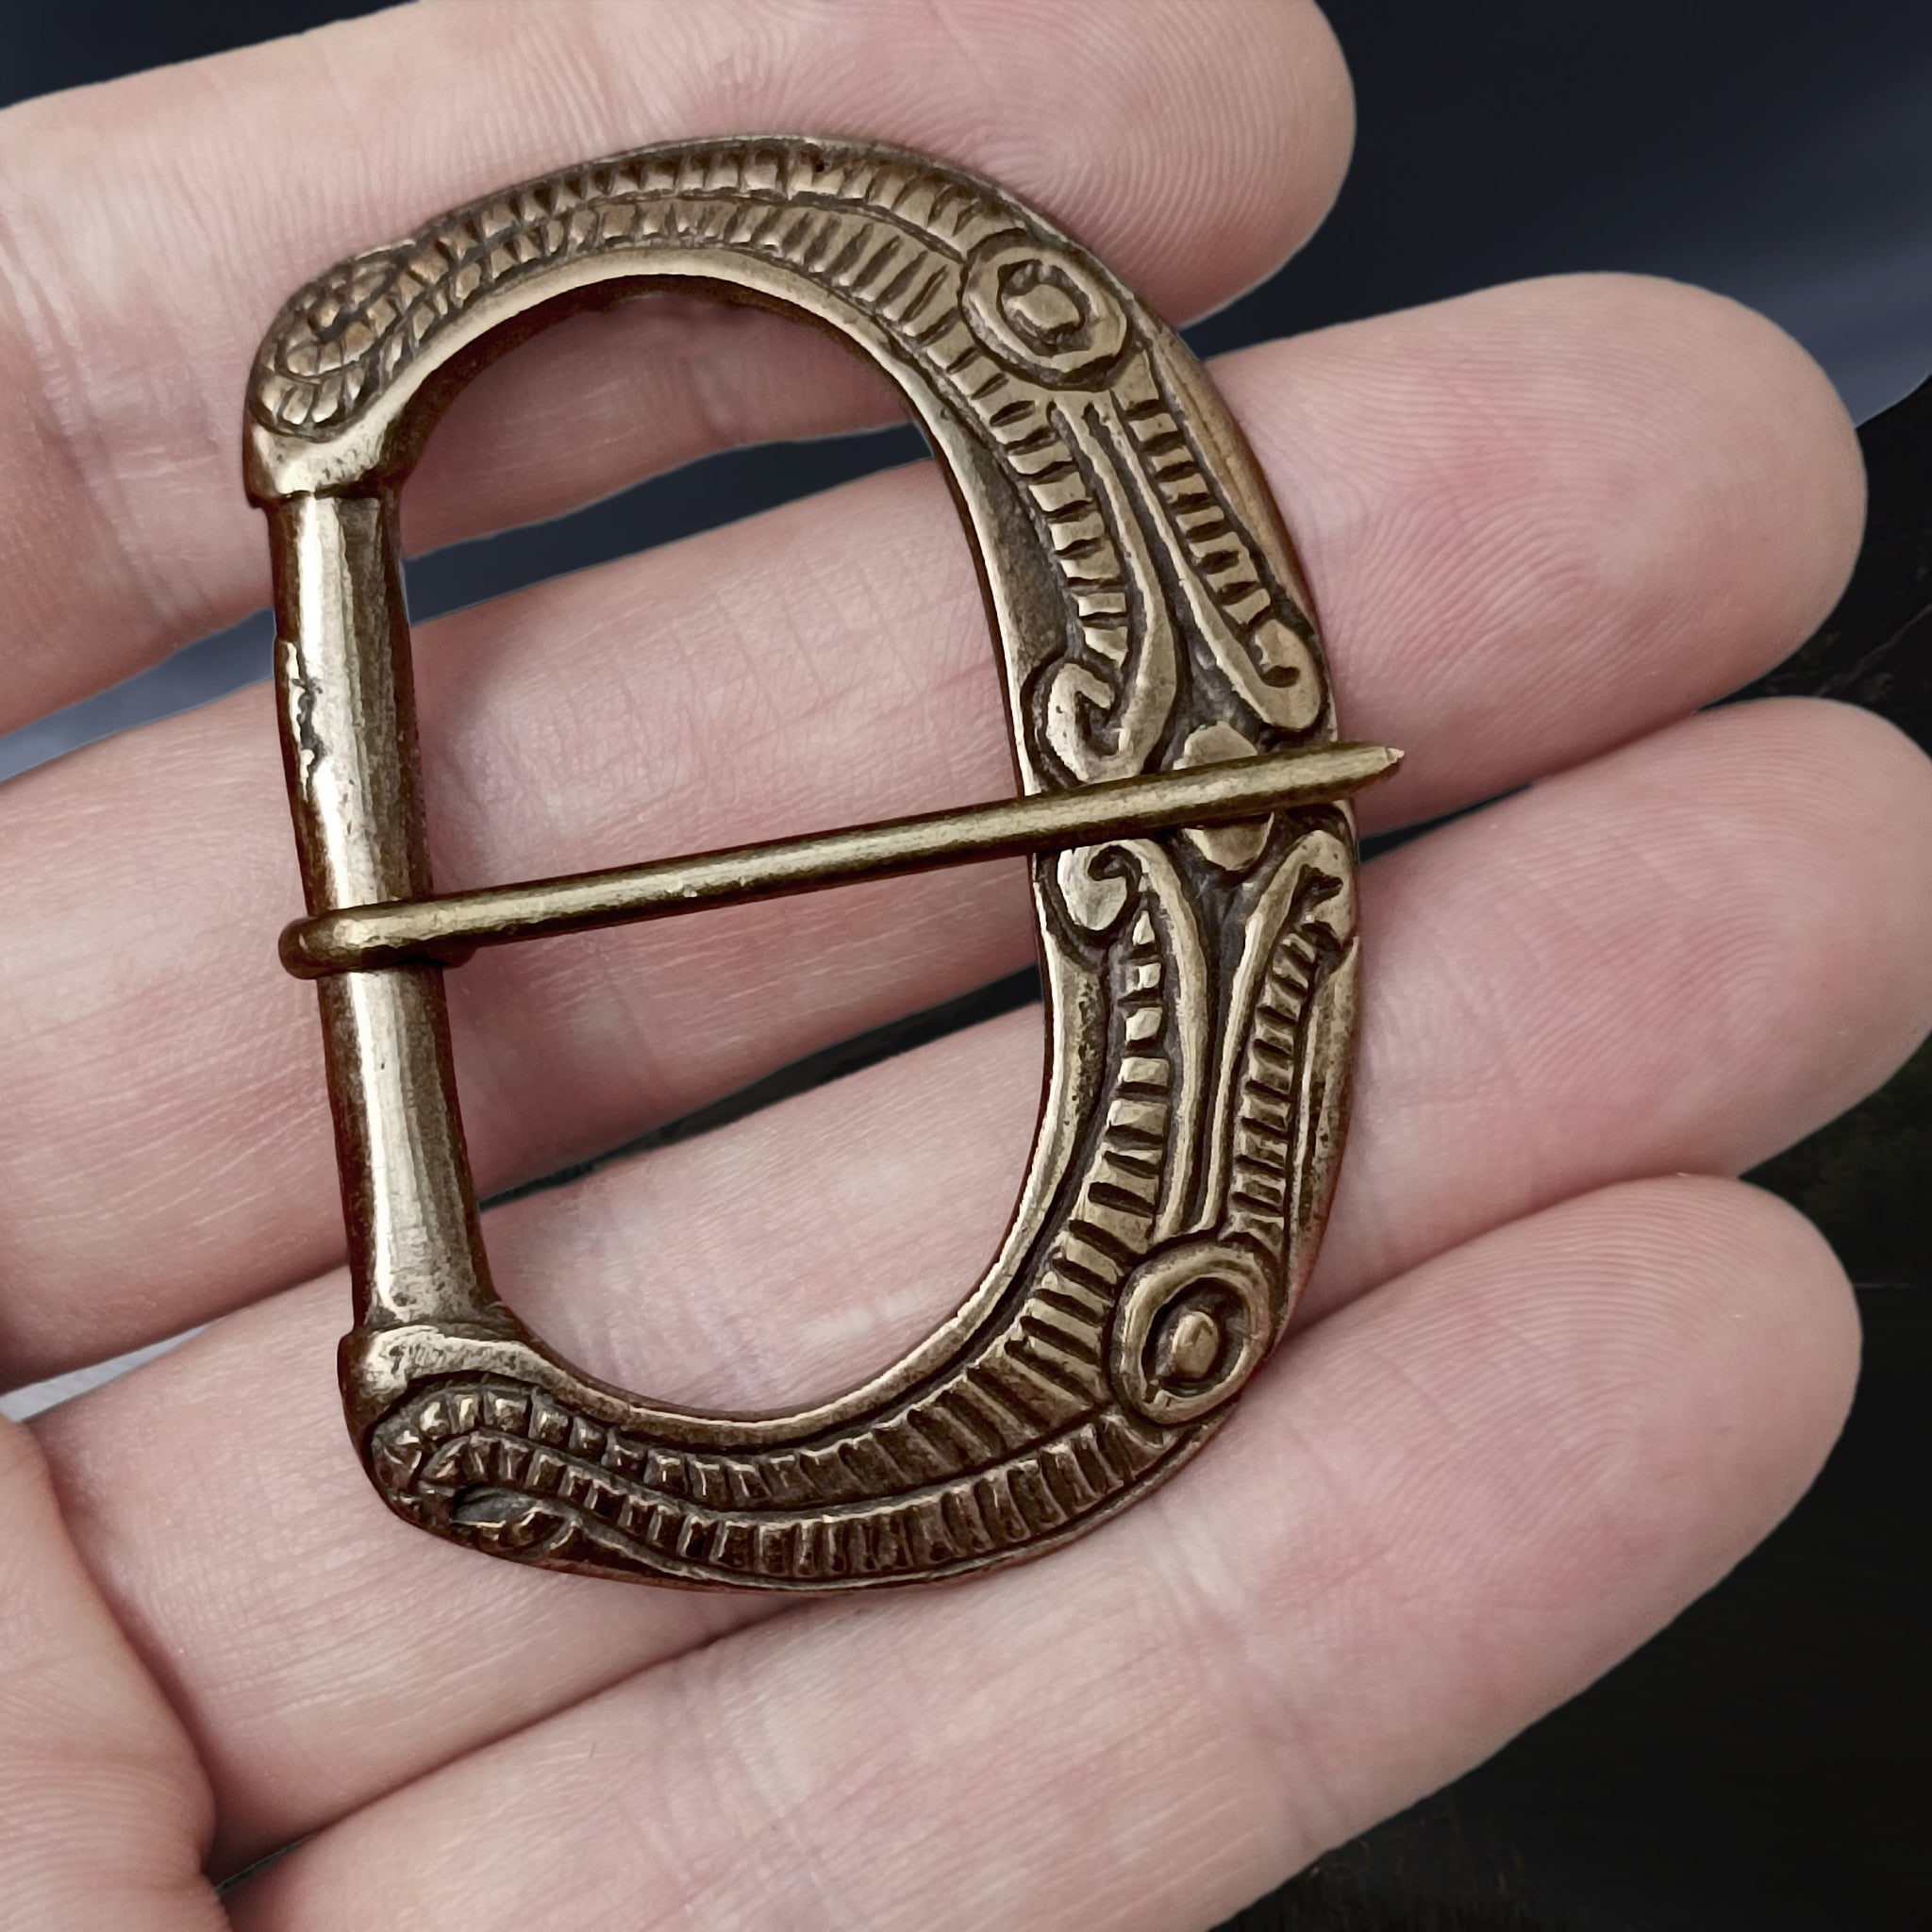 9th - 10th Century Large Ornate Bronze Replica Viking Buckle on Hand